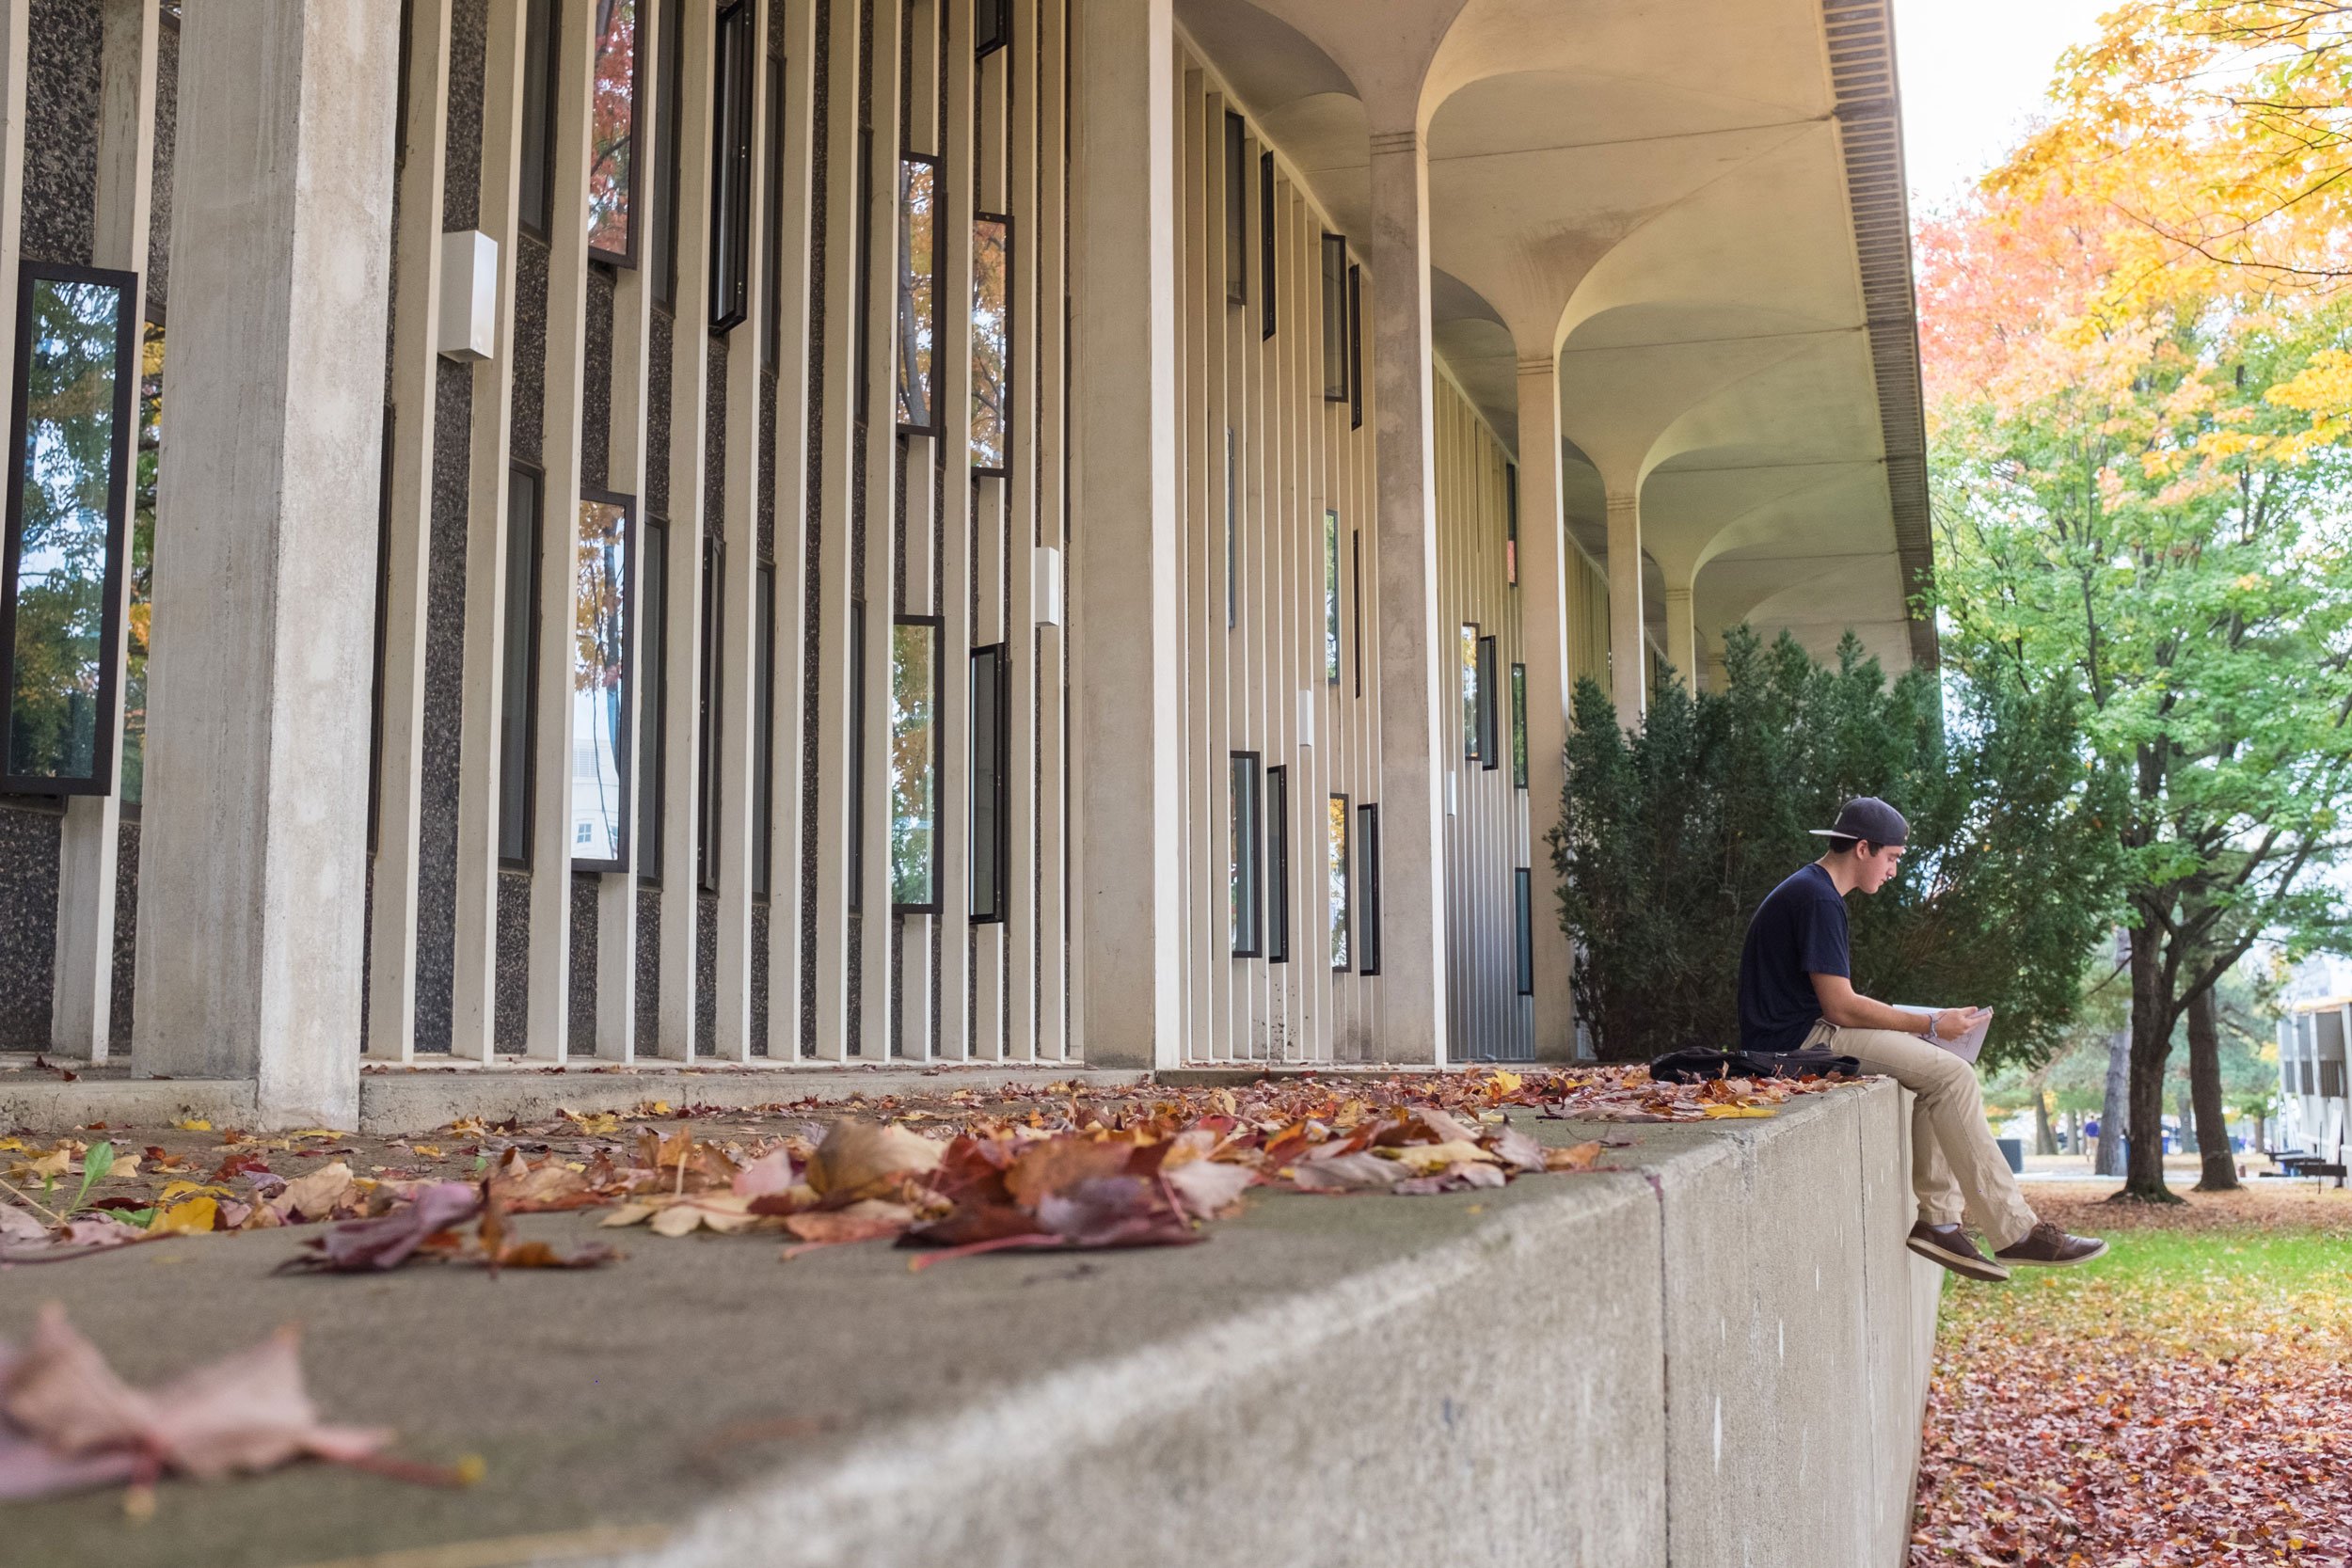 A student sits on a wall outside Indigenous Quad studying, with his feet hanging over the edge